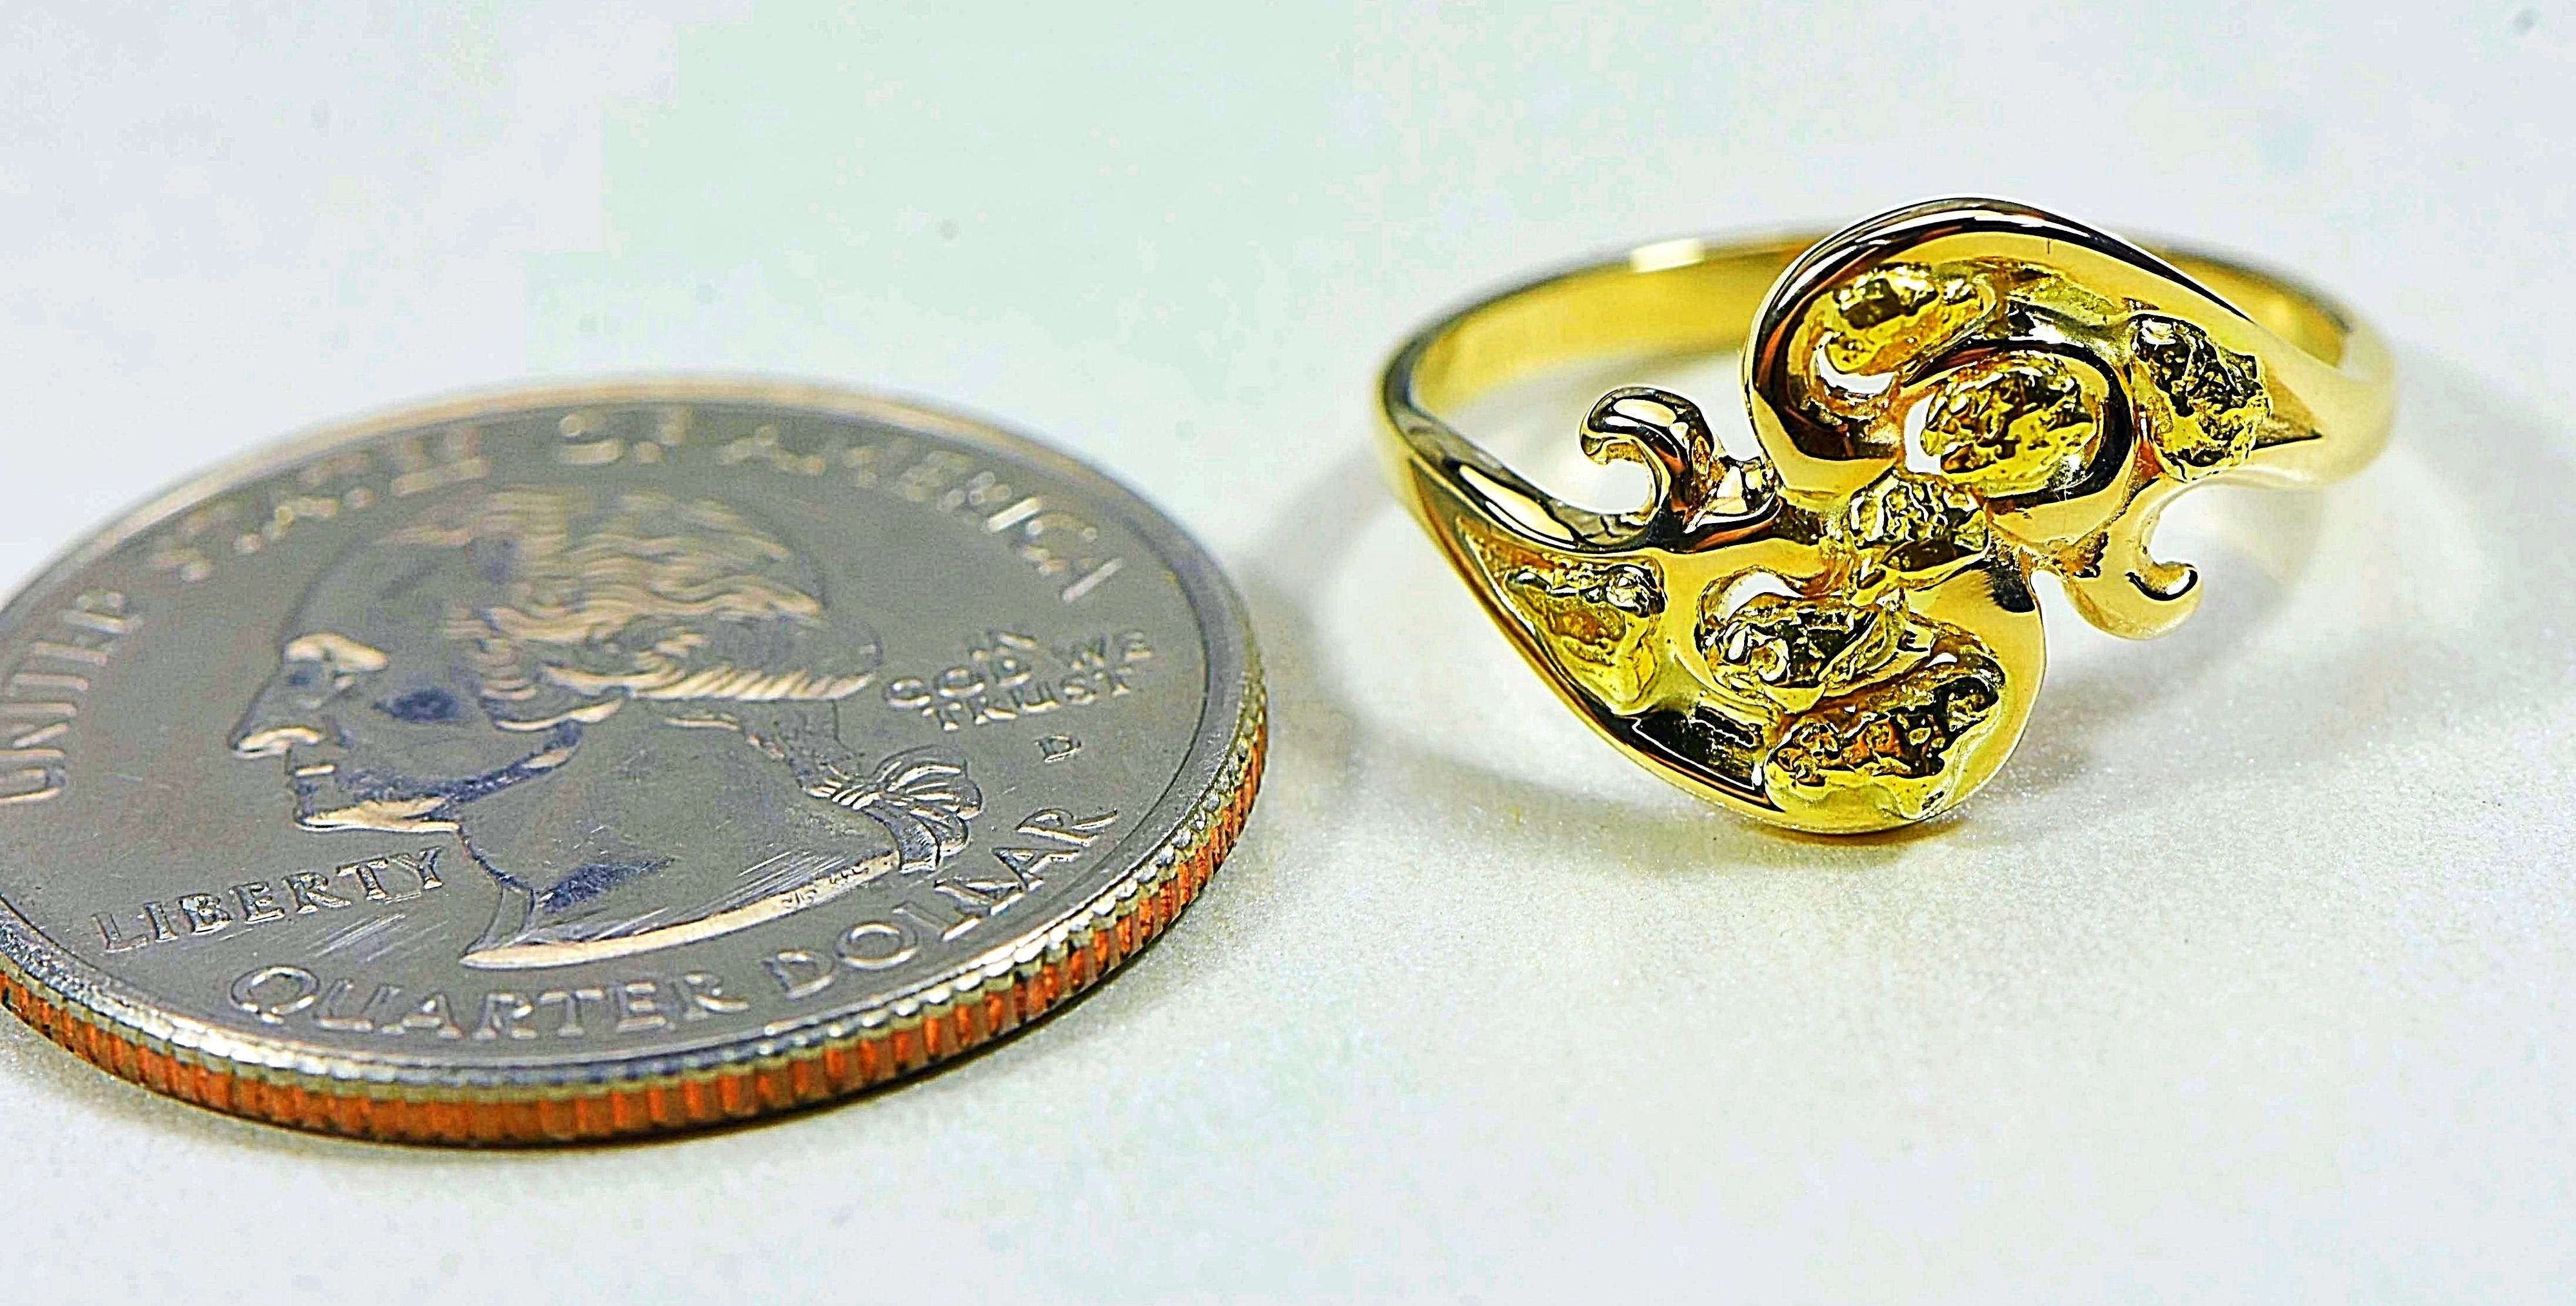 Gold Nugget Ladies Ring "Orocal" RL186 Genuine Hand Crafted Jewelry - 14K Casting